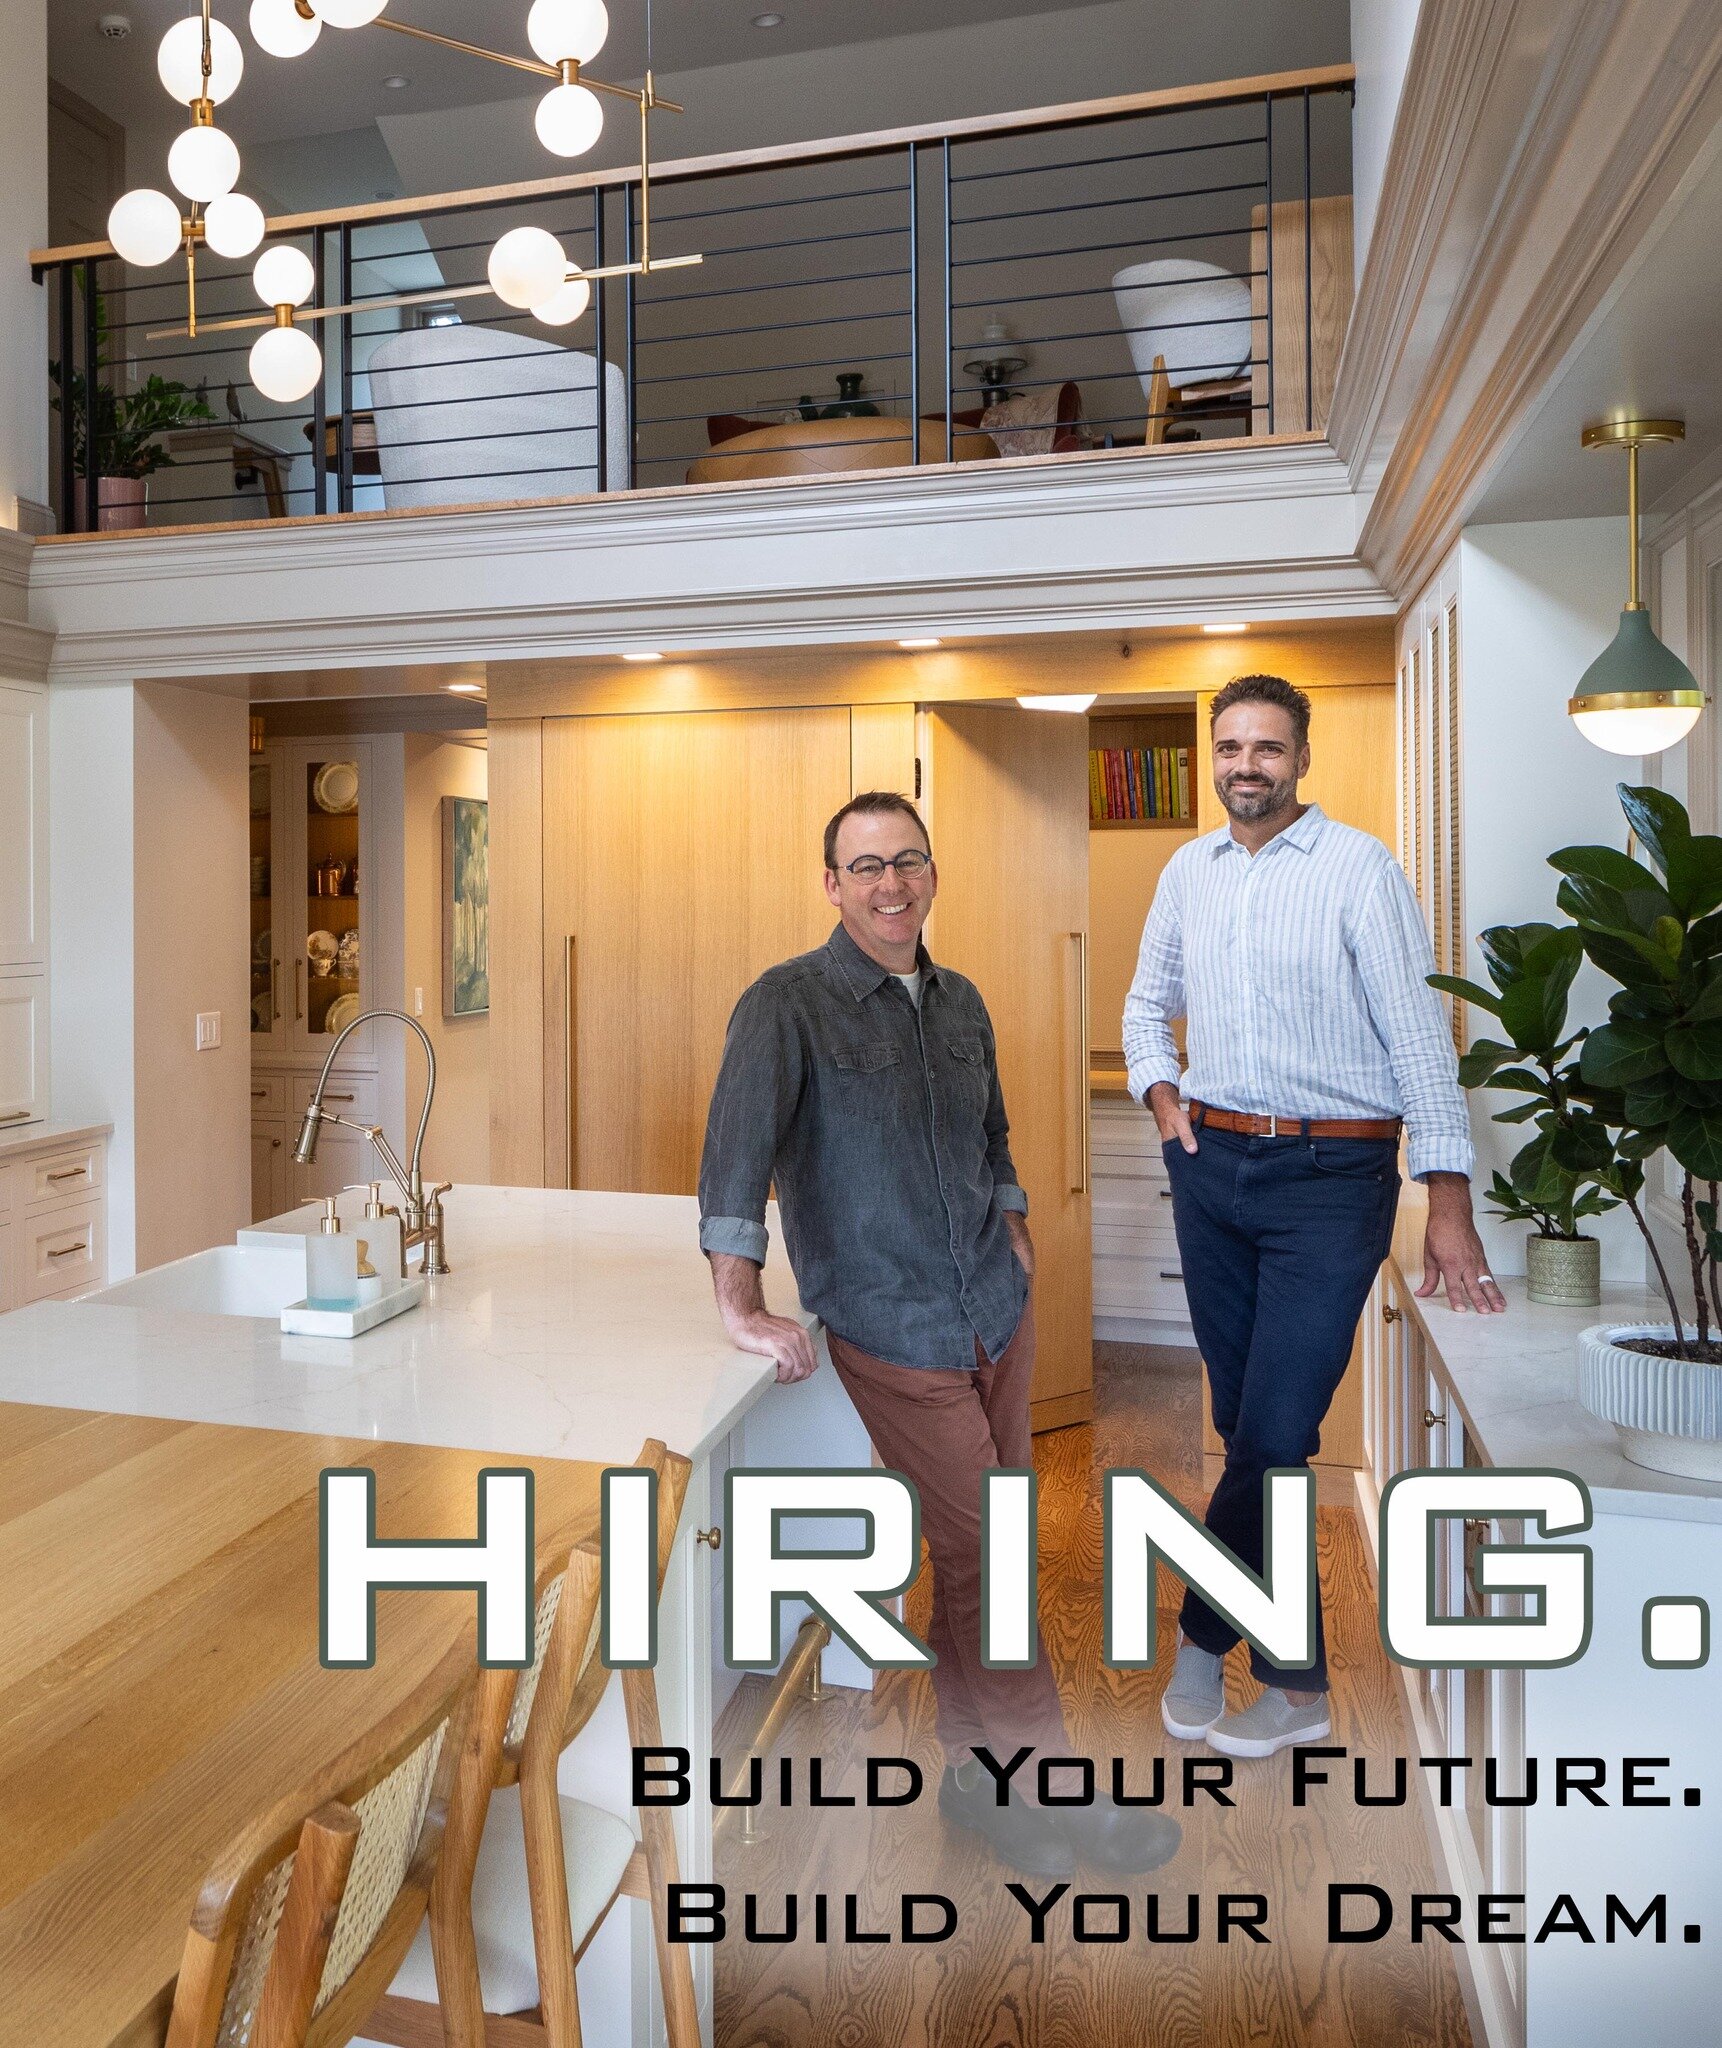 We're Hiring! 😄
Located in the heart of downtown Lancaster, PA, Capstone Design + Build is a craft builder of signature spaces. We are currently seeking a Construction Supervisor to join our growing team of passionate &amp; skilled innovators. 
To l